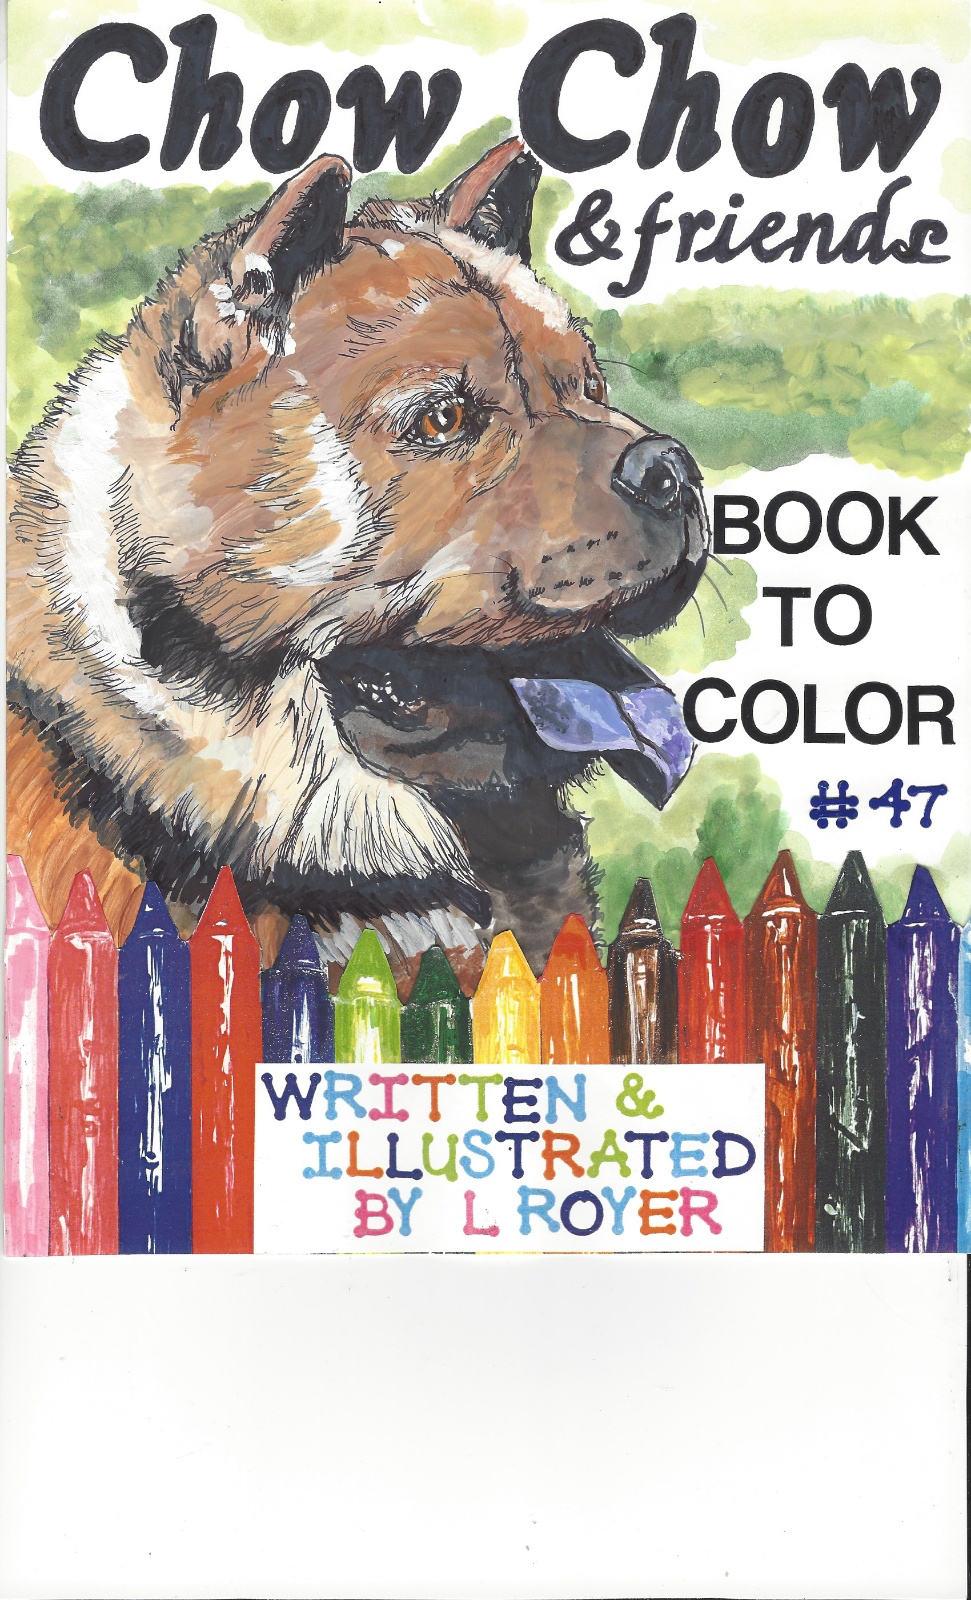 CHOW CHOW DOG ART COLORING BOOK BY ARTIST L ROYER  AUTOGRAPHED #47  BRAND NEW